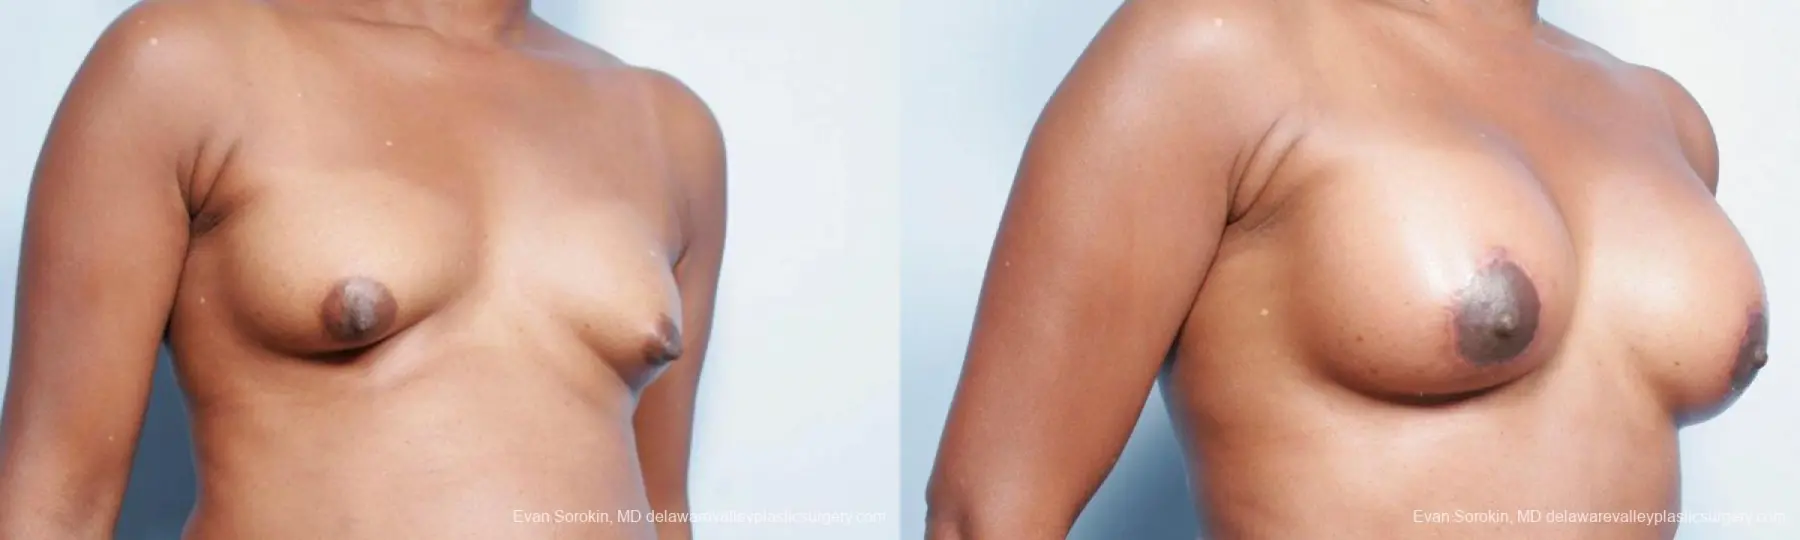 Philadelphia Breast Lift and Augmentation 9427 - Before and After 2